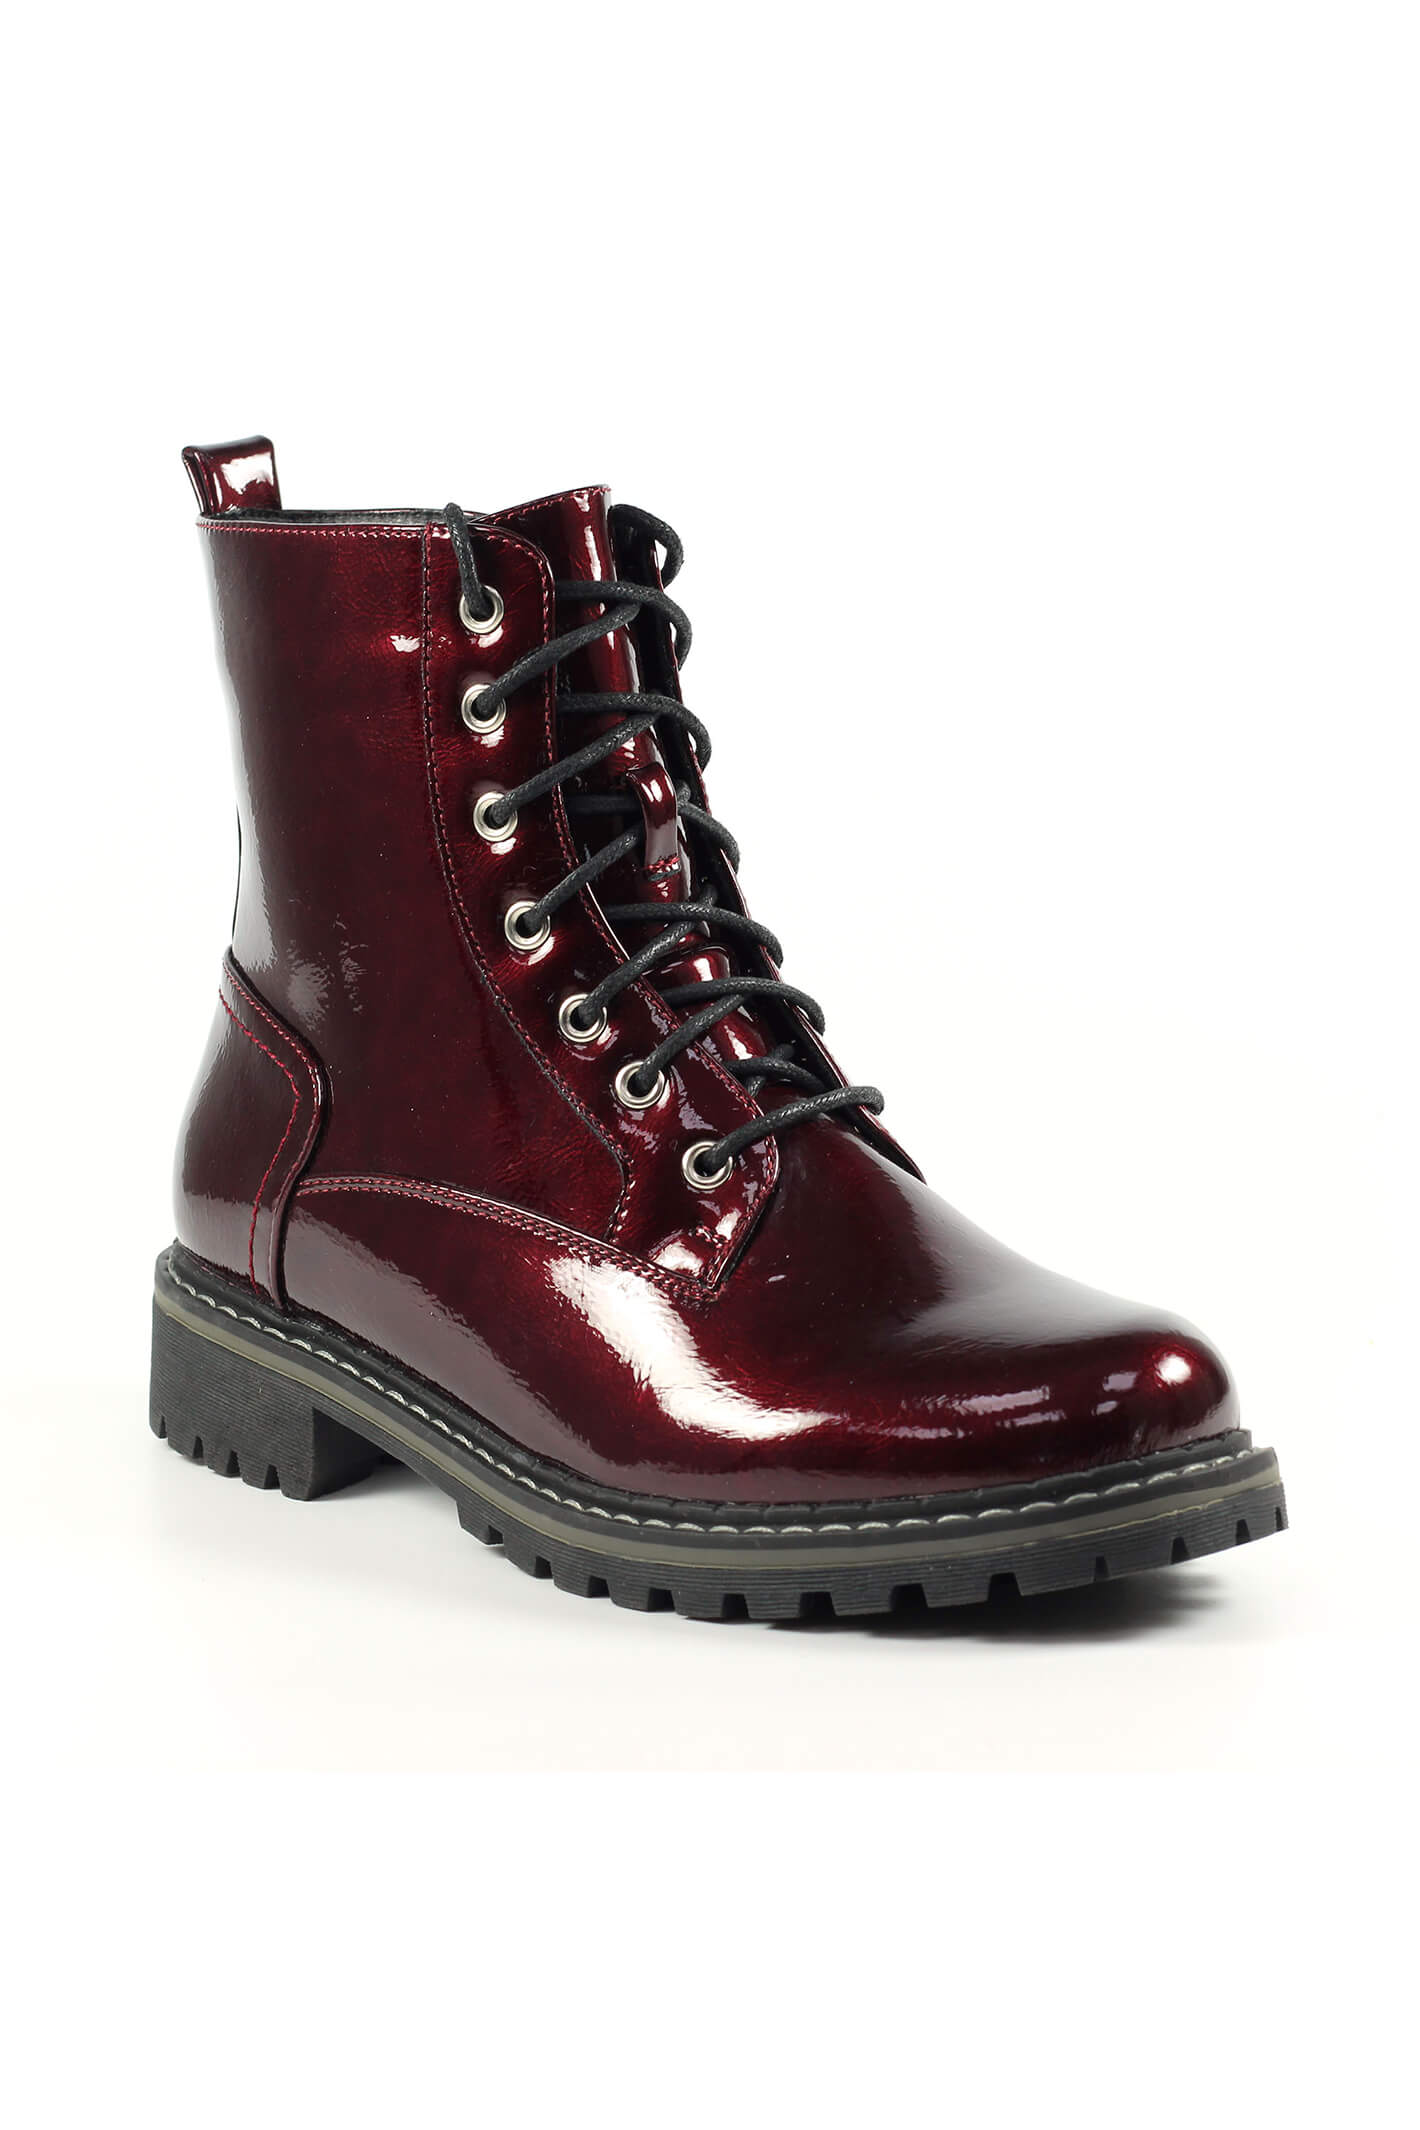 Lunar GLW011 Nala Burgundy Red Patent Boots – Experience